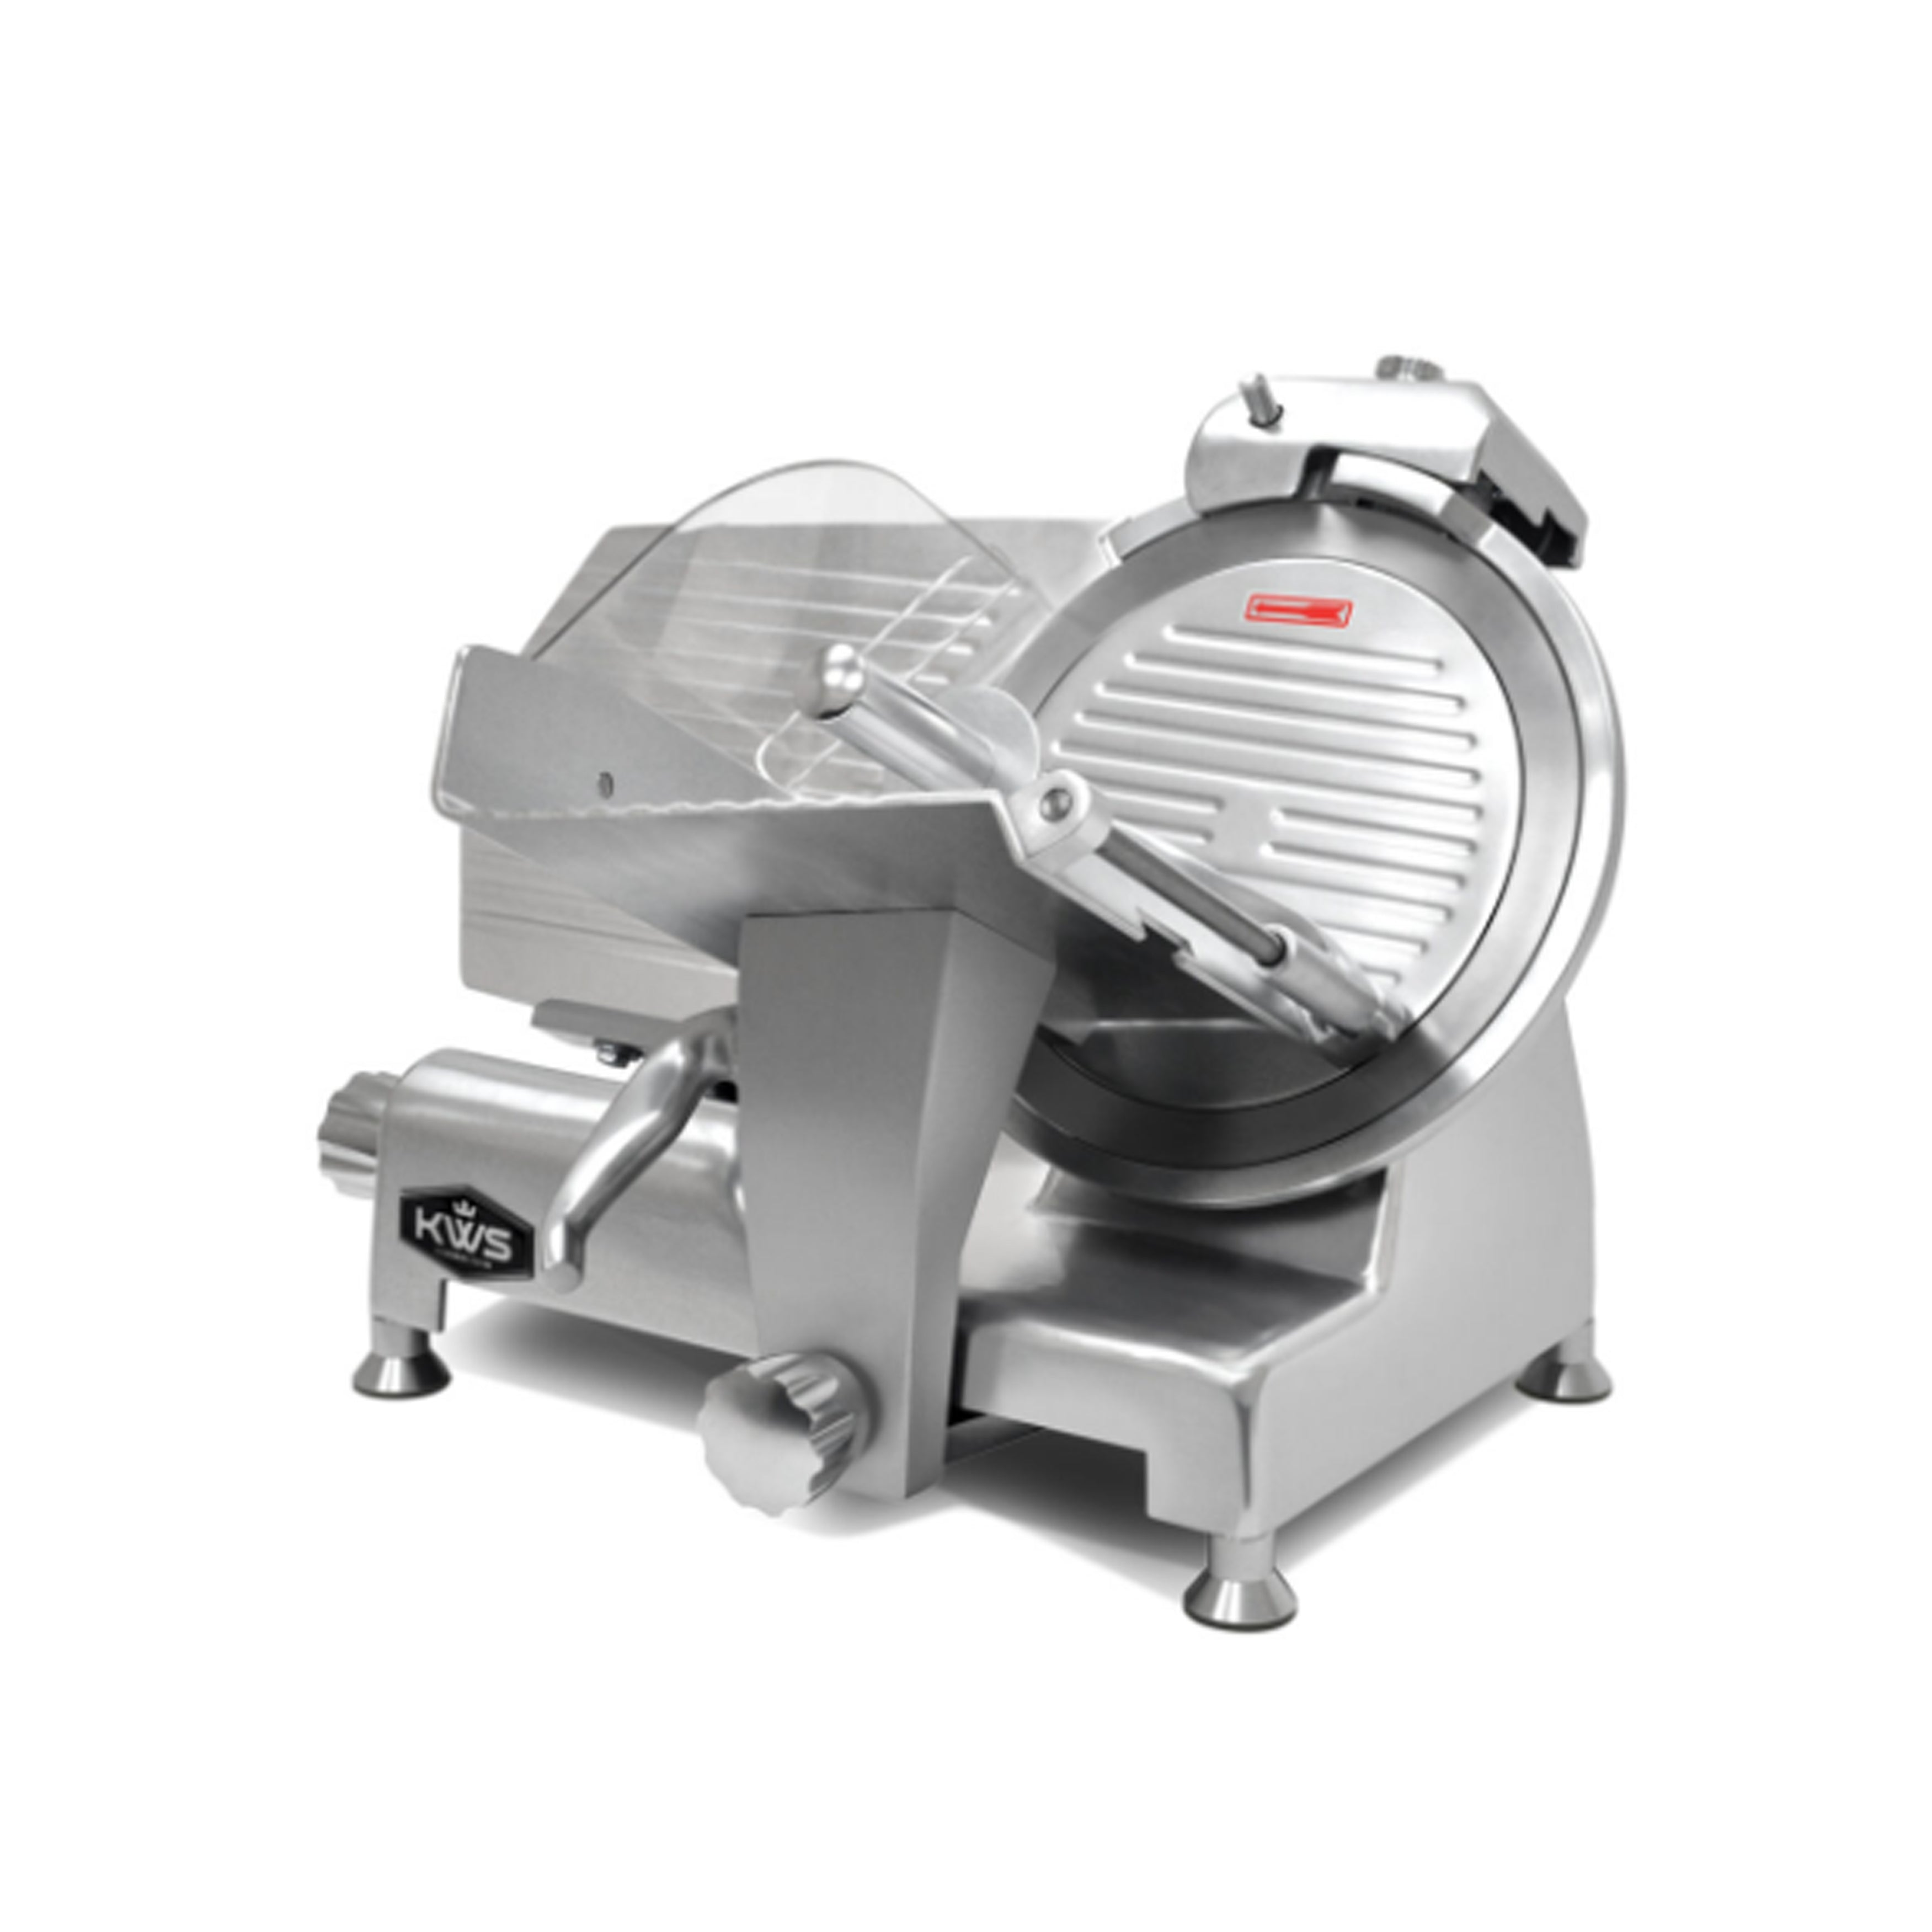 KWS - MS-12DS, Commercial 12″ Electric Meat Slicer with Stainless Steel Blade